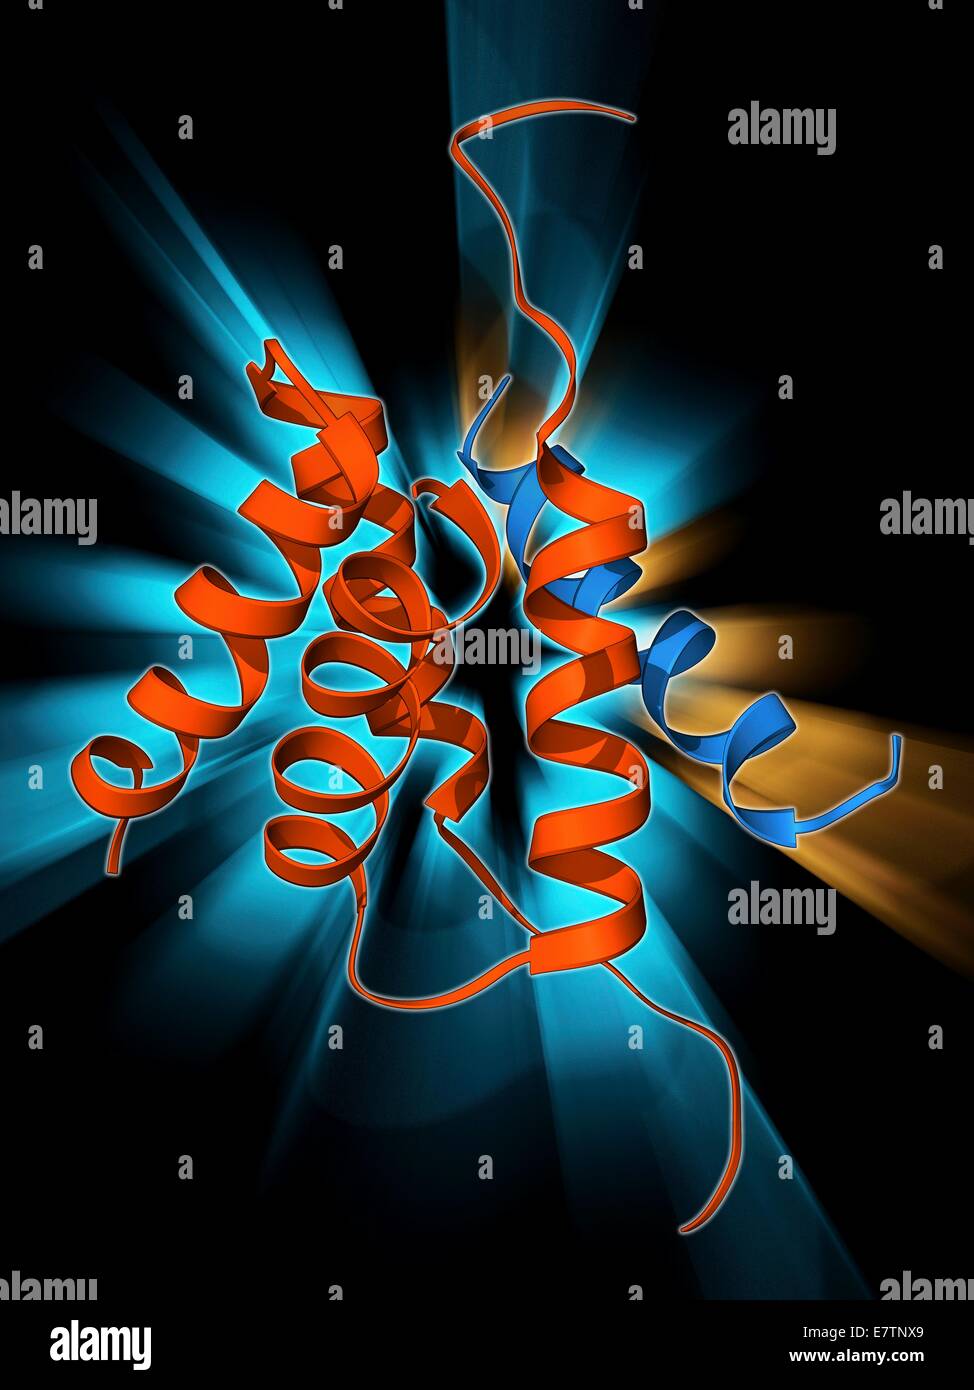 Protein kinase regulatory subunit. Molecular model of a regulatory subunit from cAMP-dependent protein kinase bound to. This enzyme is also known as protein kinase A (PKA). Protein kinase enzymes modify other proteins by chemically adding phosphate groups Stock Photo